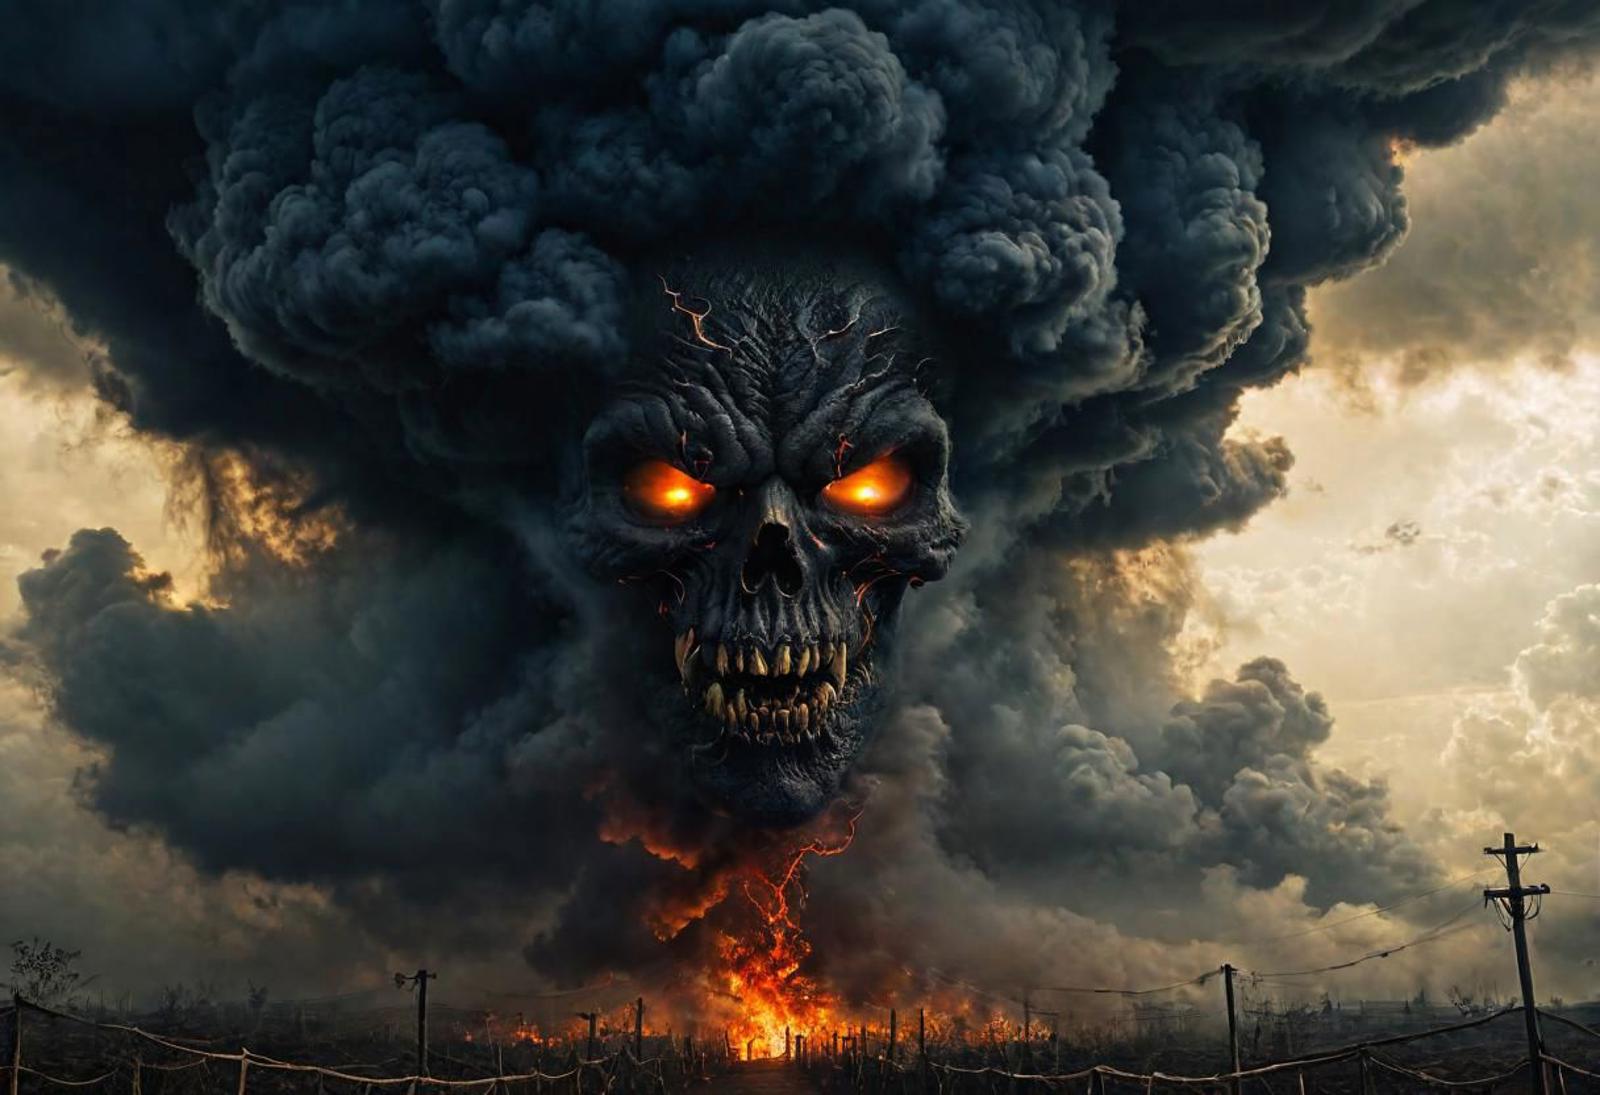 A frightening scene of a demonic skull with red eyes, surrounded by smoke and fire.